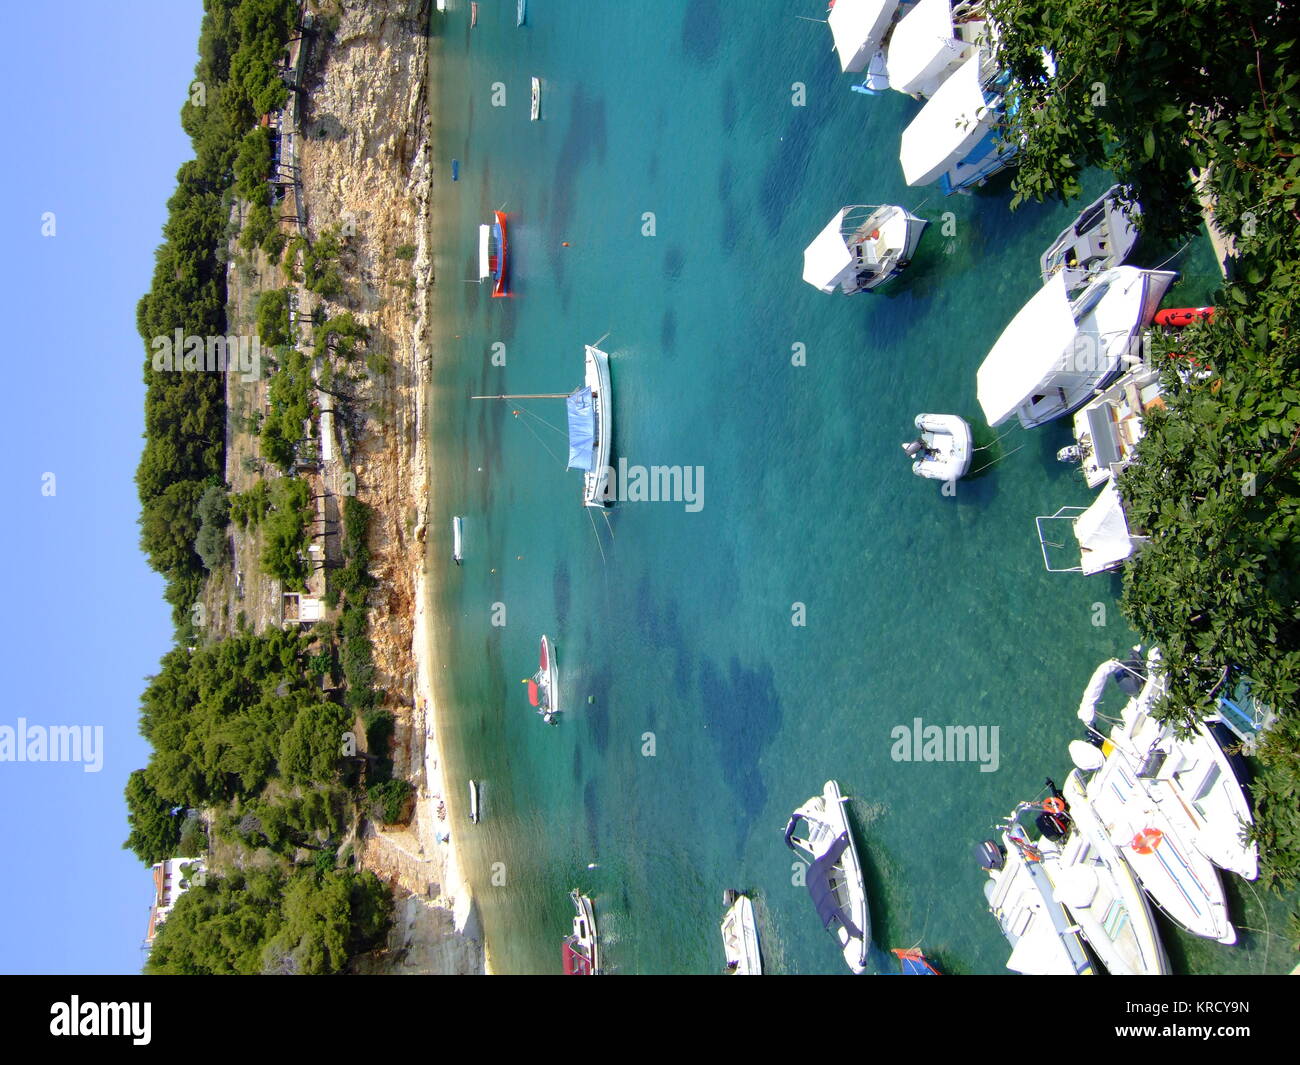 The small harbour of Votsi  with its beautiful turquoise  water.        Date: 2006 Stock Photo